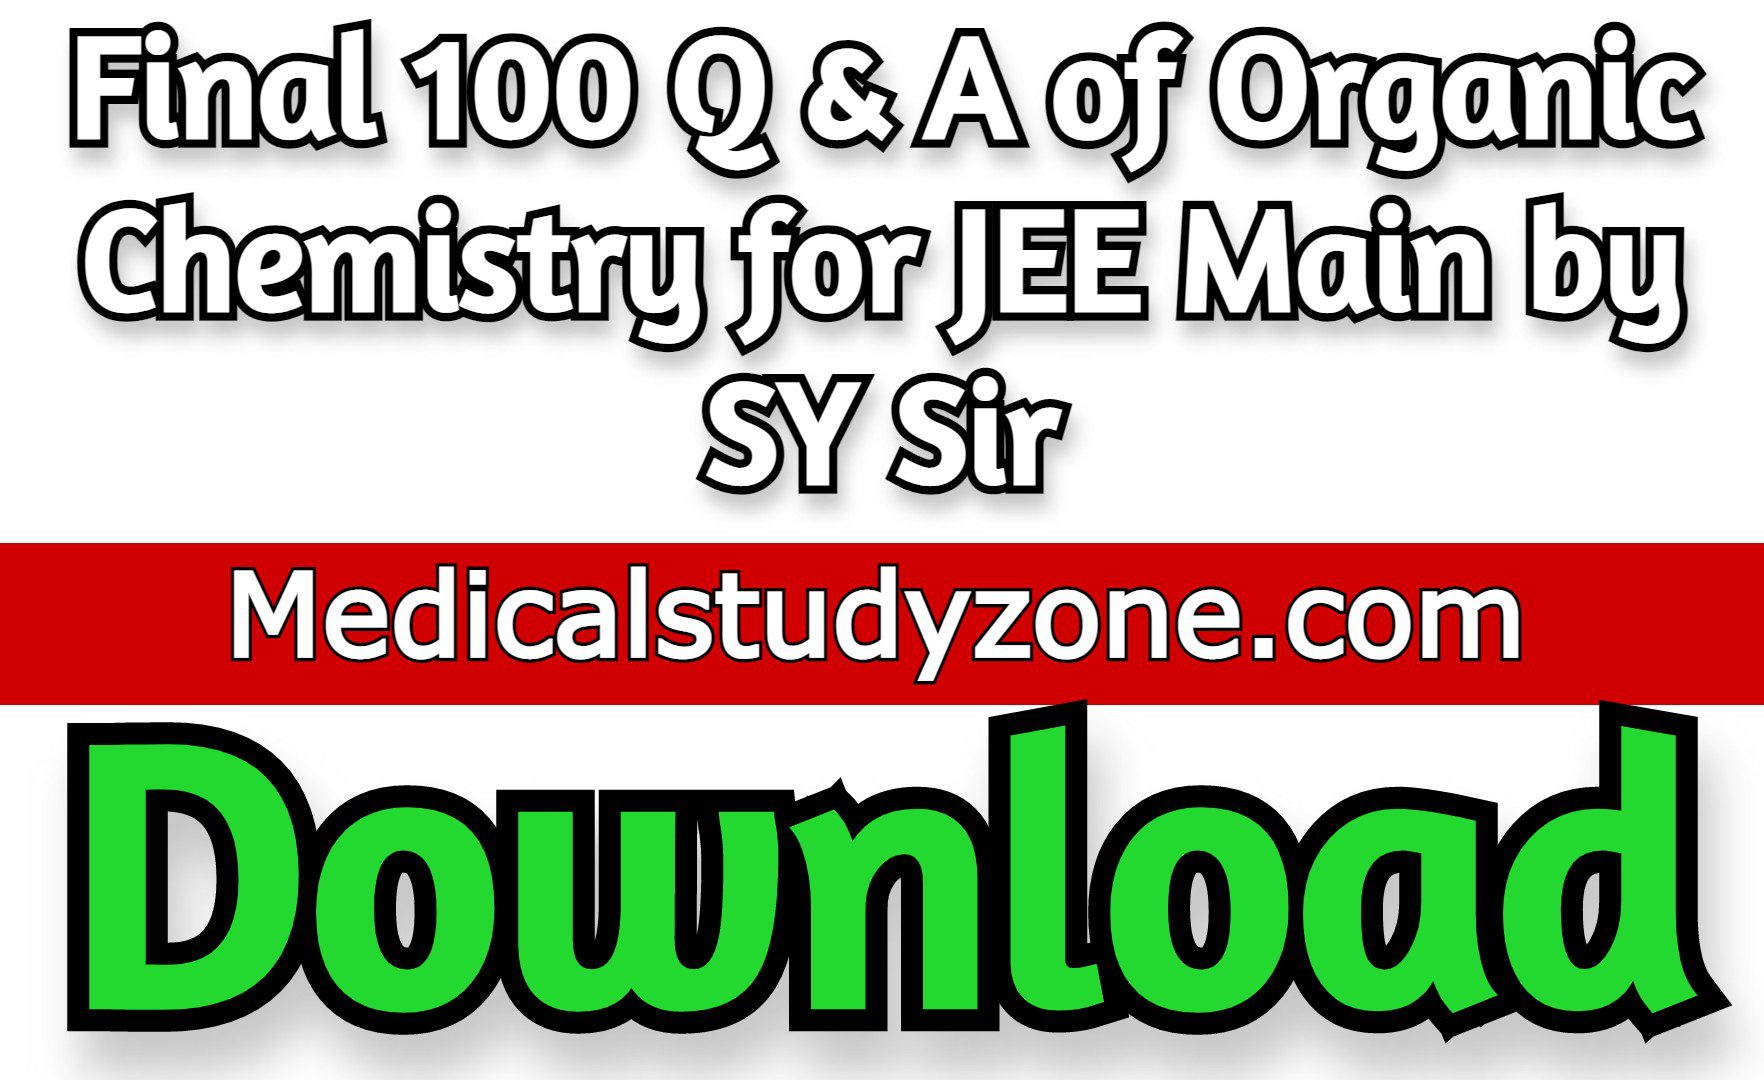 Final 100 Q & A of Organic Chemistry for JEE Main by SY Sir Free Download